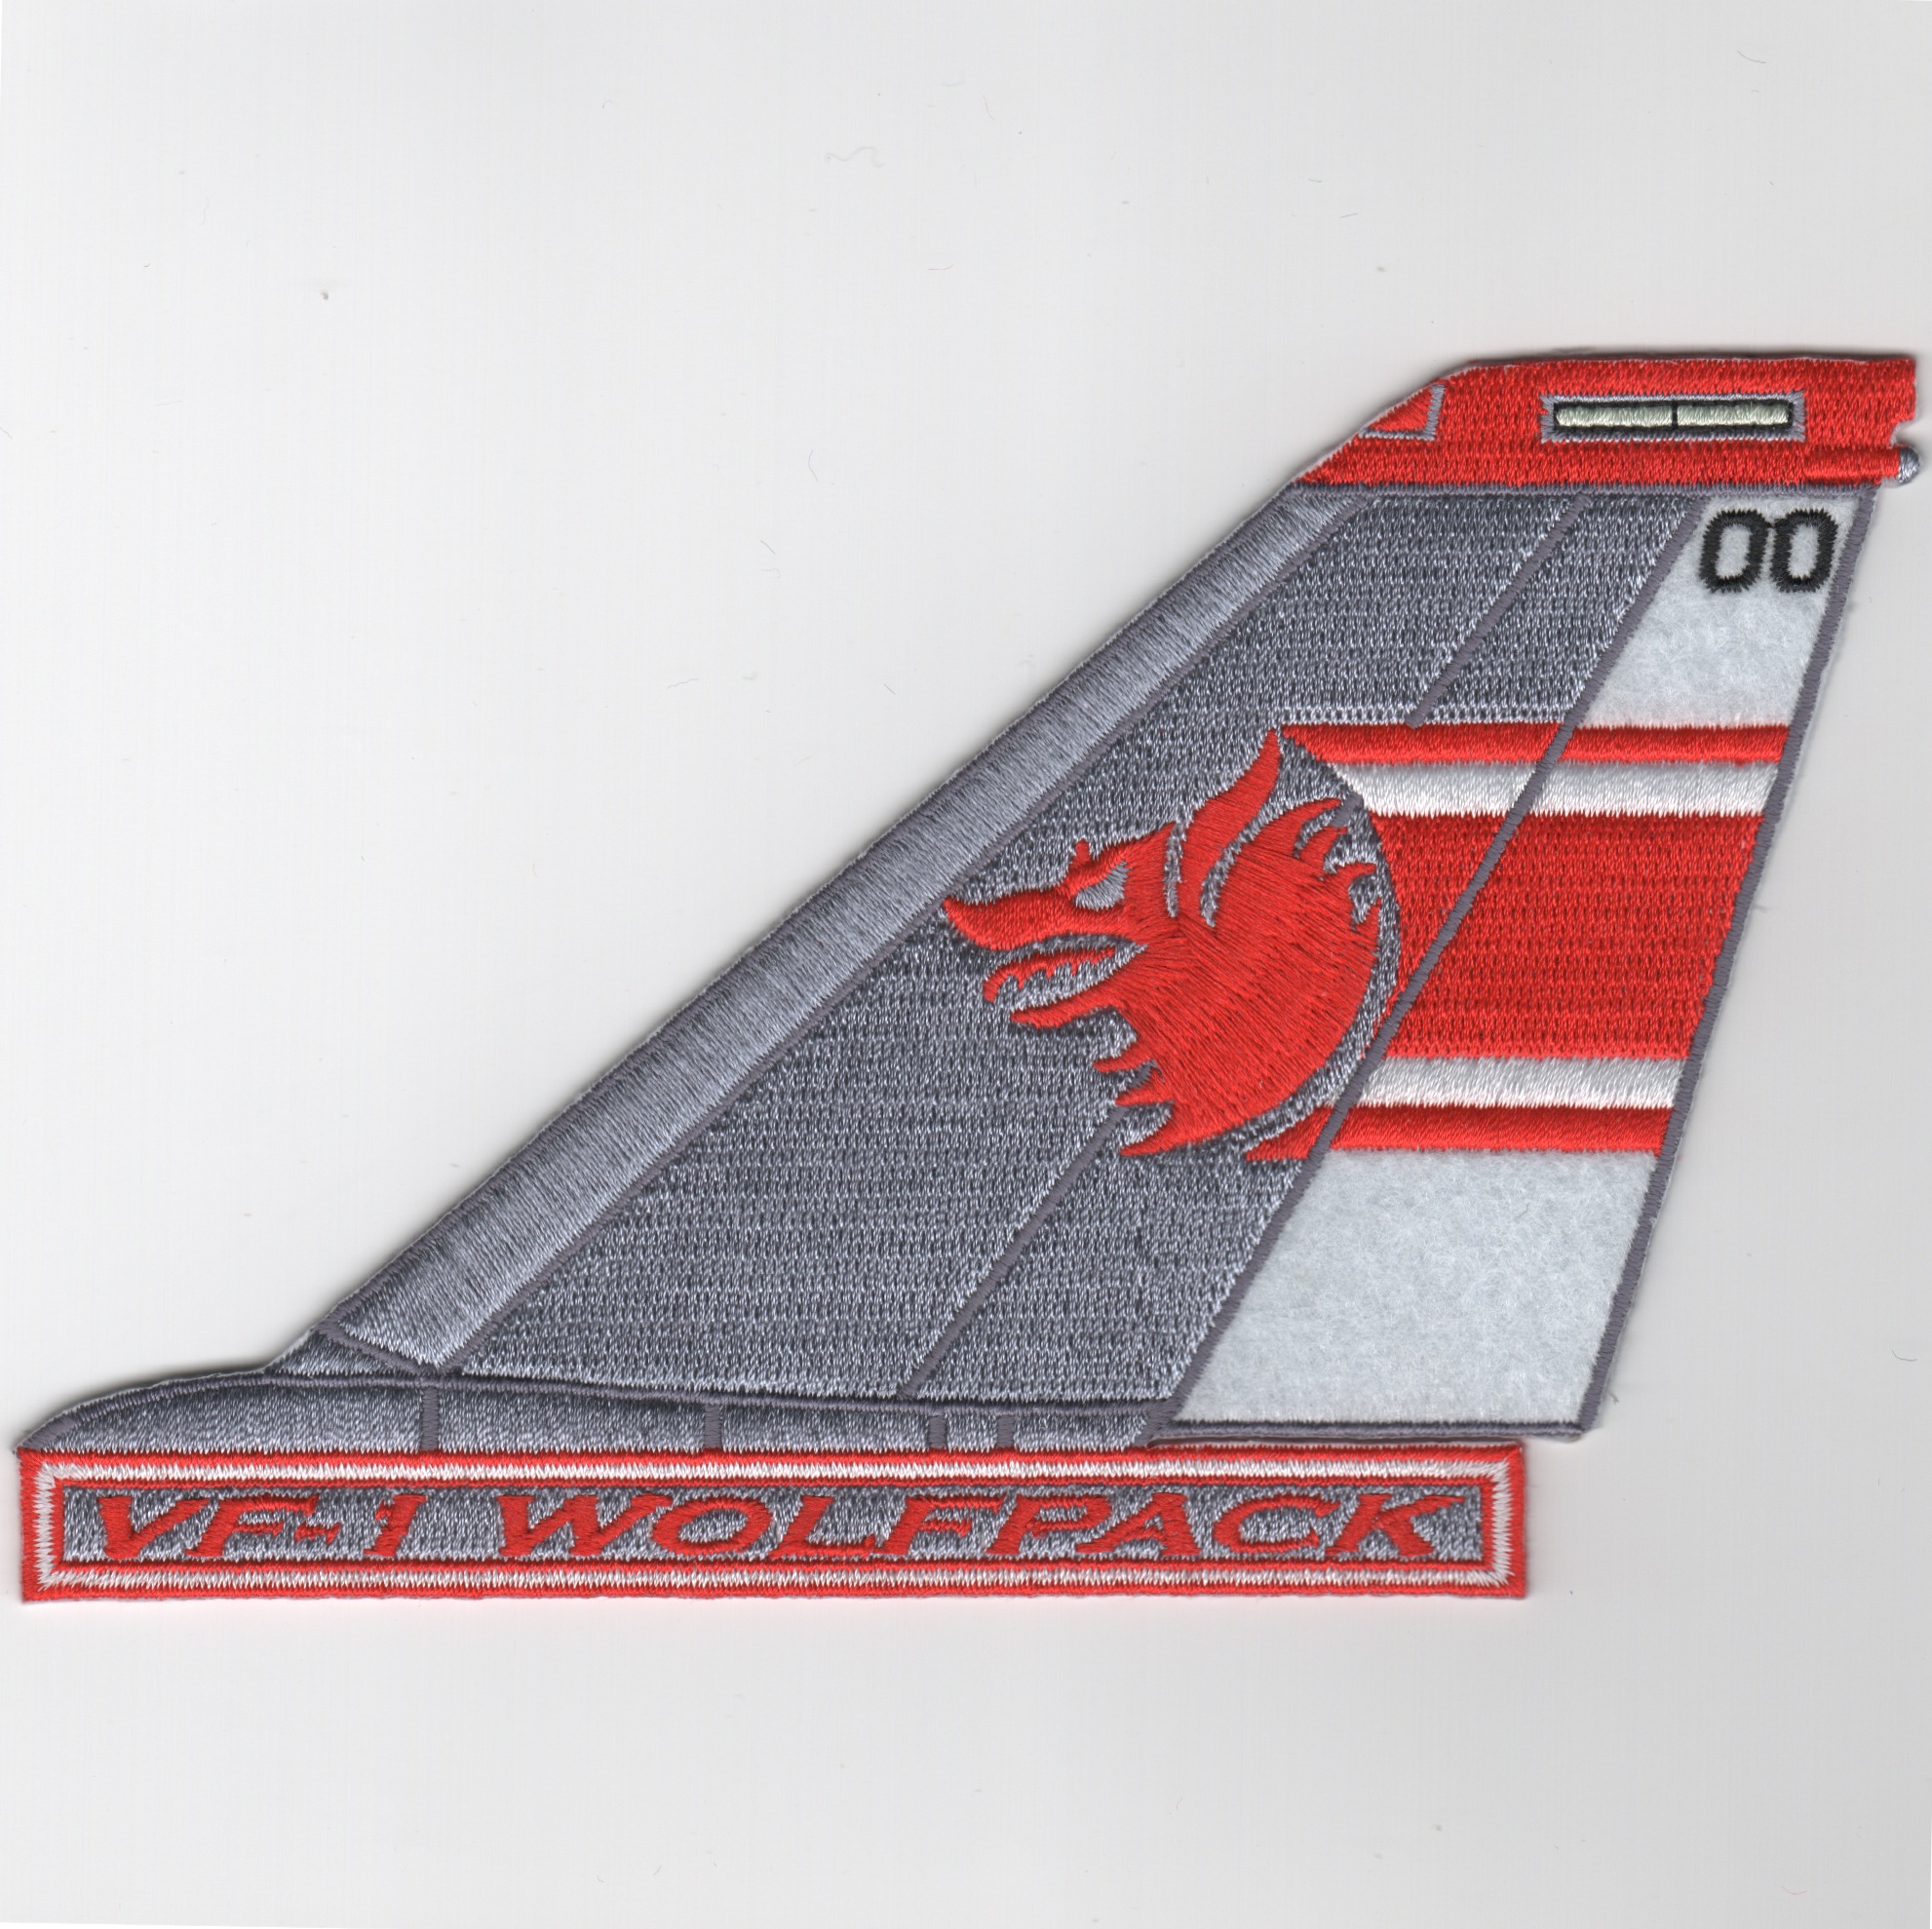 VF-1 F-14 Tomcat Tail Fin (Red/White/Text)